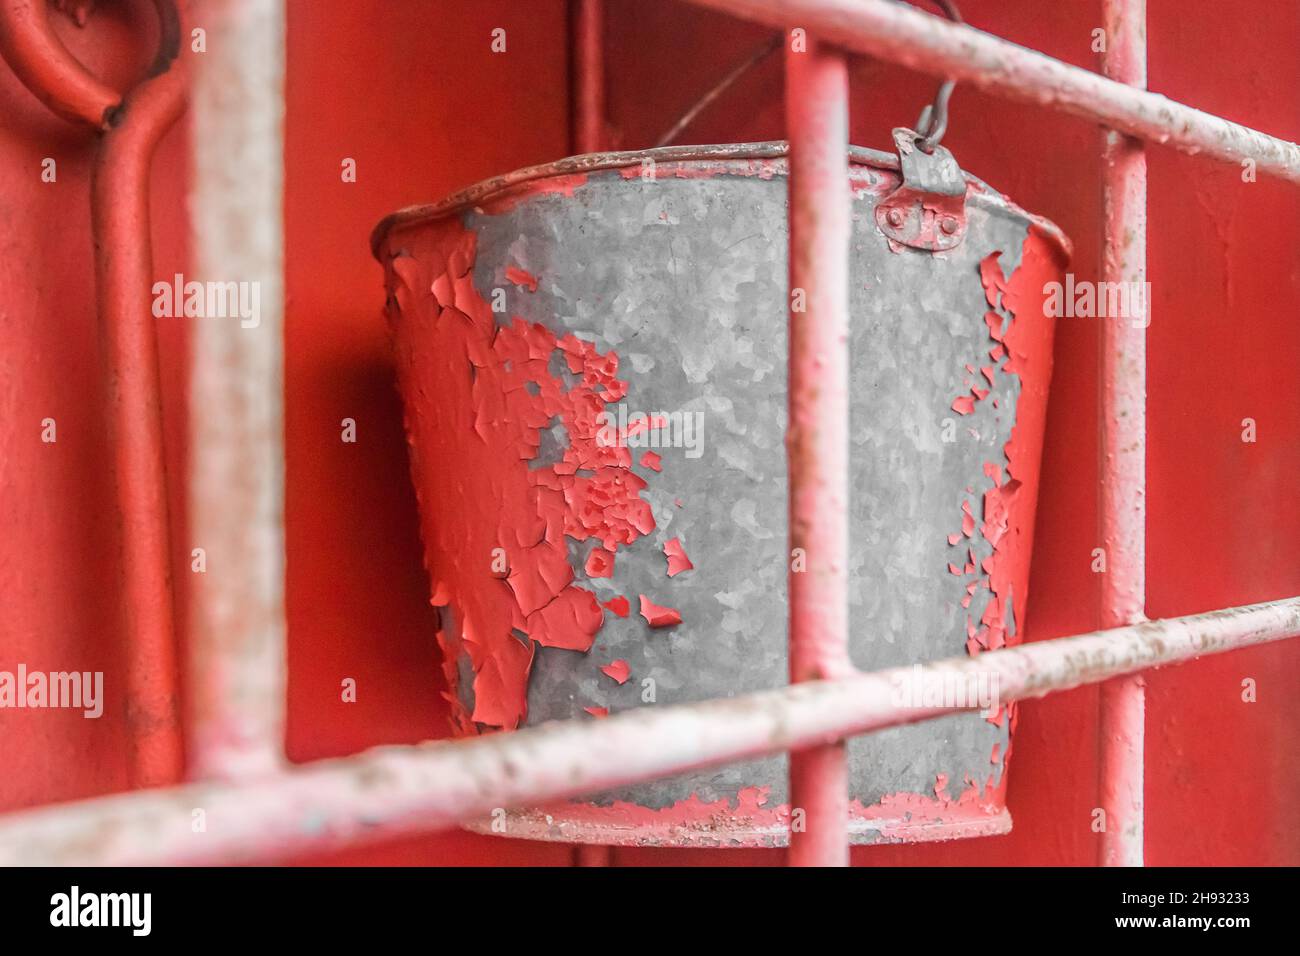 A bucket of galvanized iron with red peeling paint in an old fire box equipment and tools to help in safely extinguishing a fire. Stock Photo